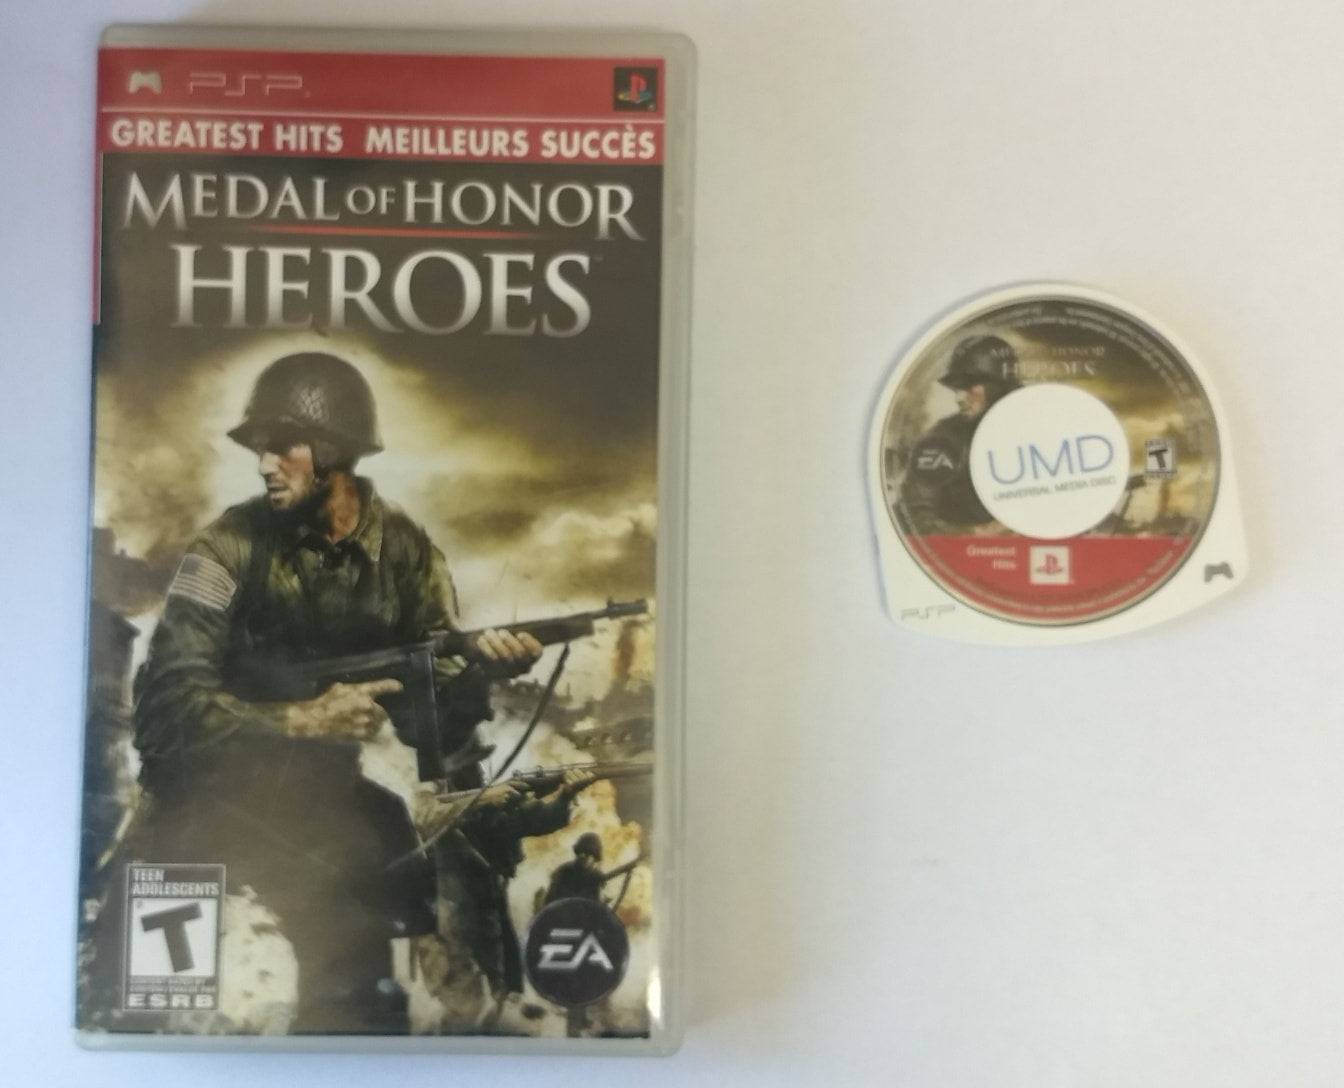 MEDAL OF HONOR HEROES GREATEST HITS PLAYSTATION PORTABLE PSP